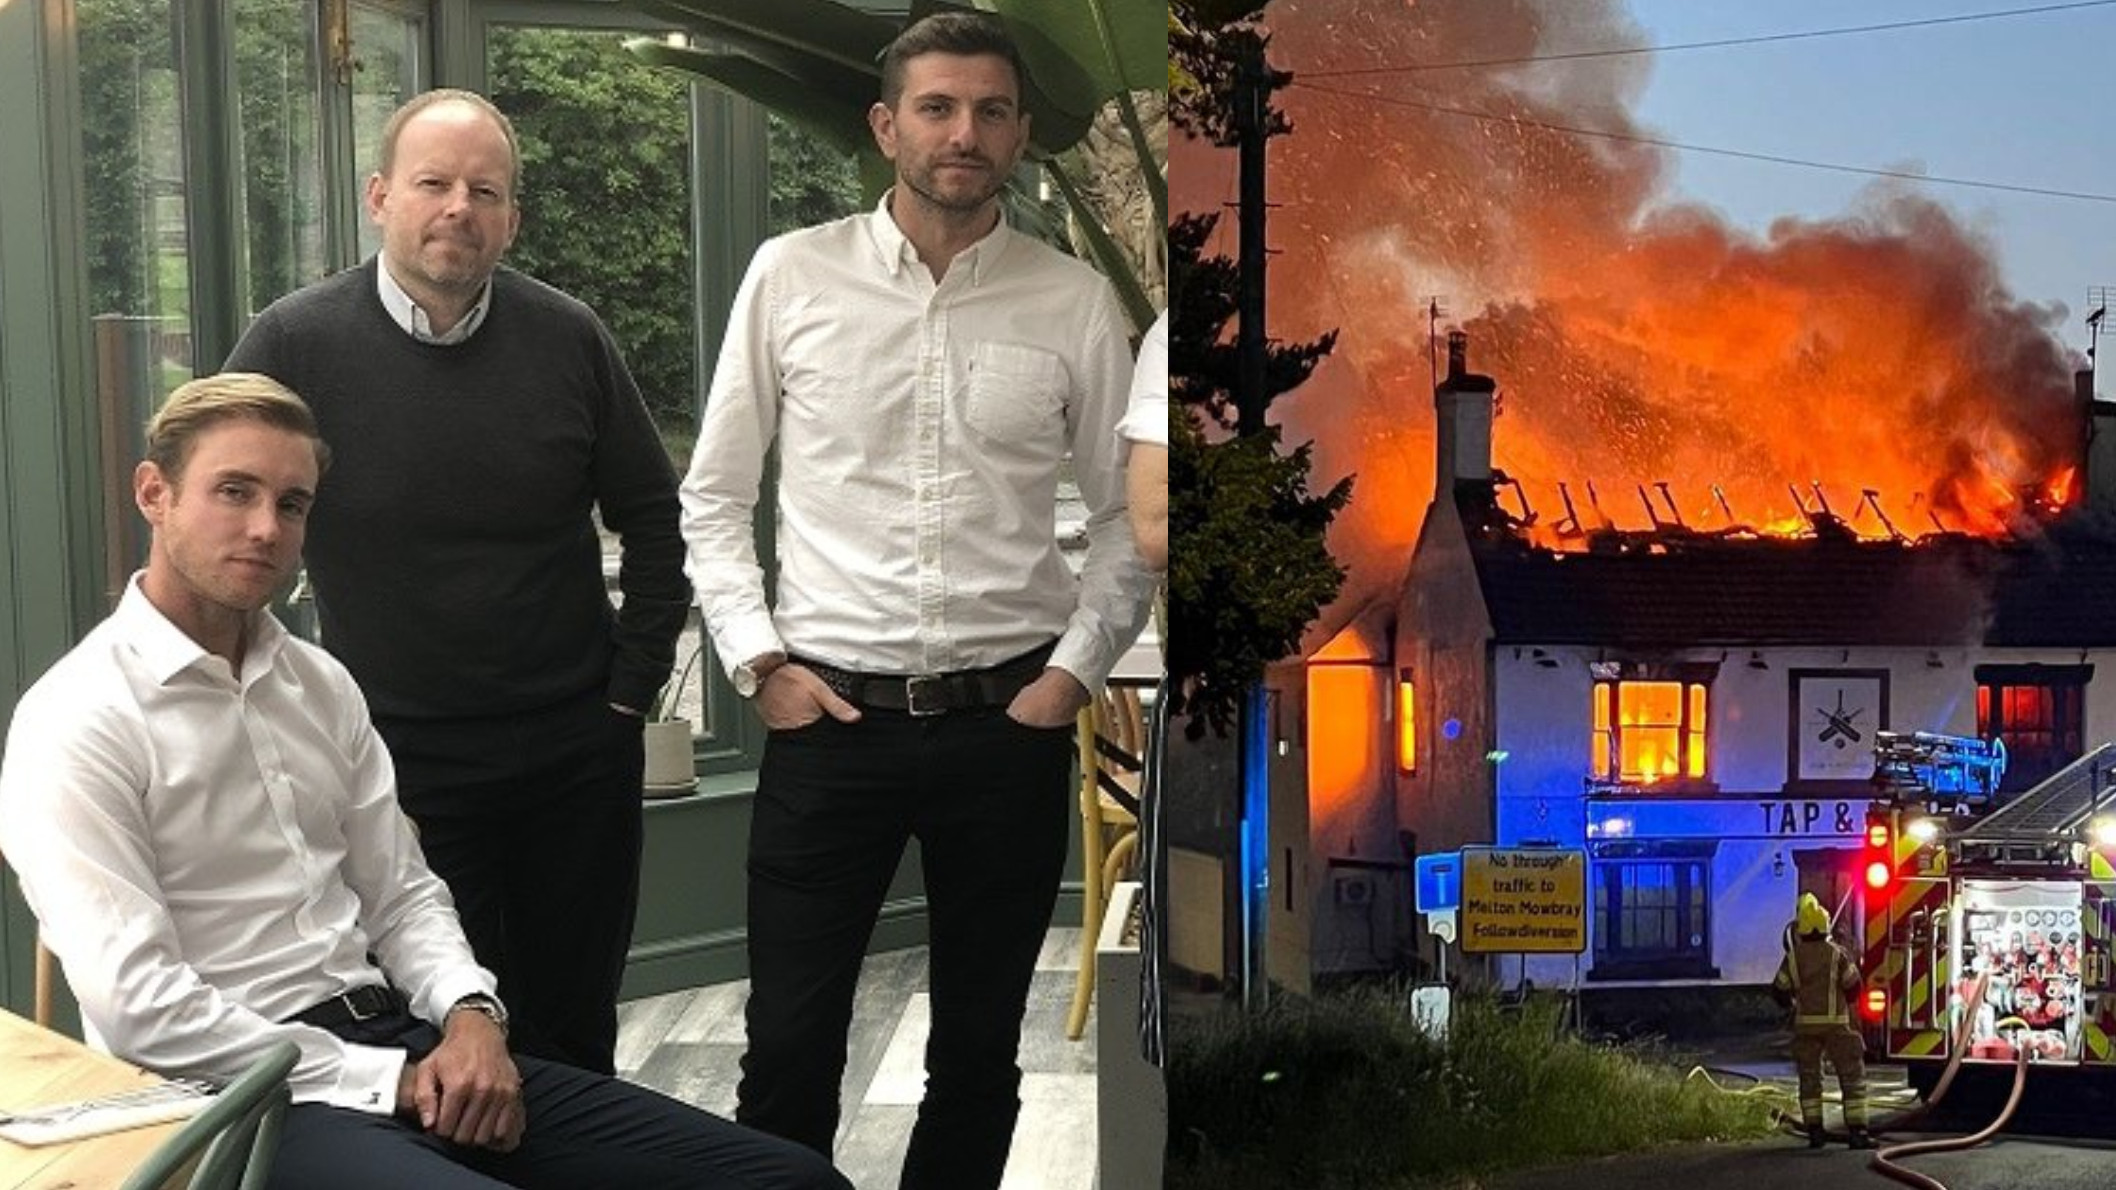 Pub co-owned by Stuart Broad ravaged by fire; pacer reacts